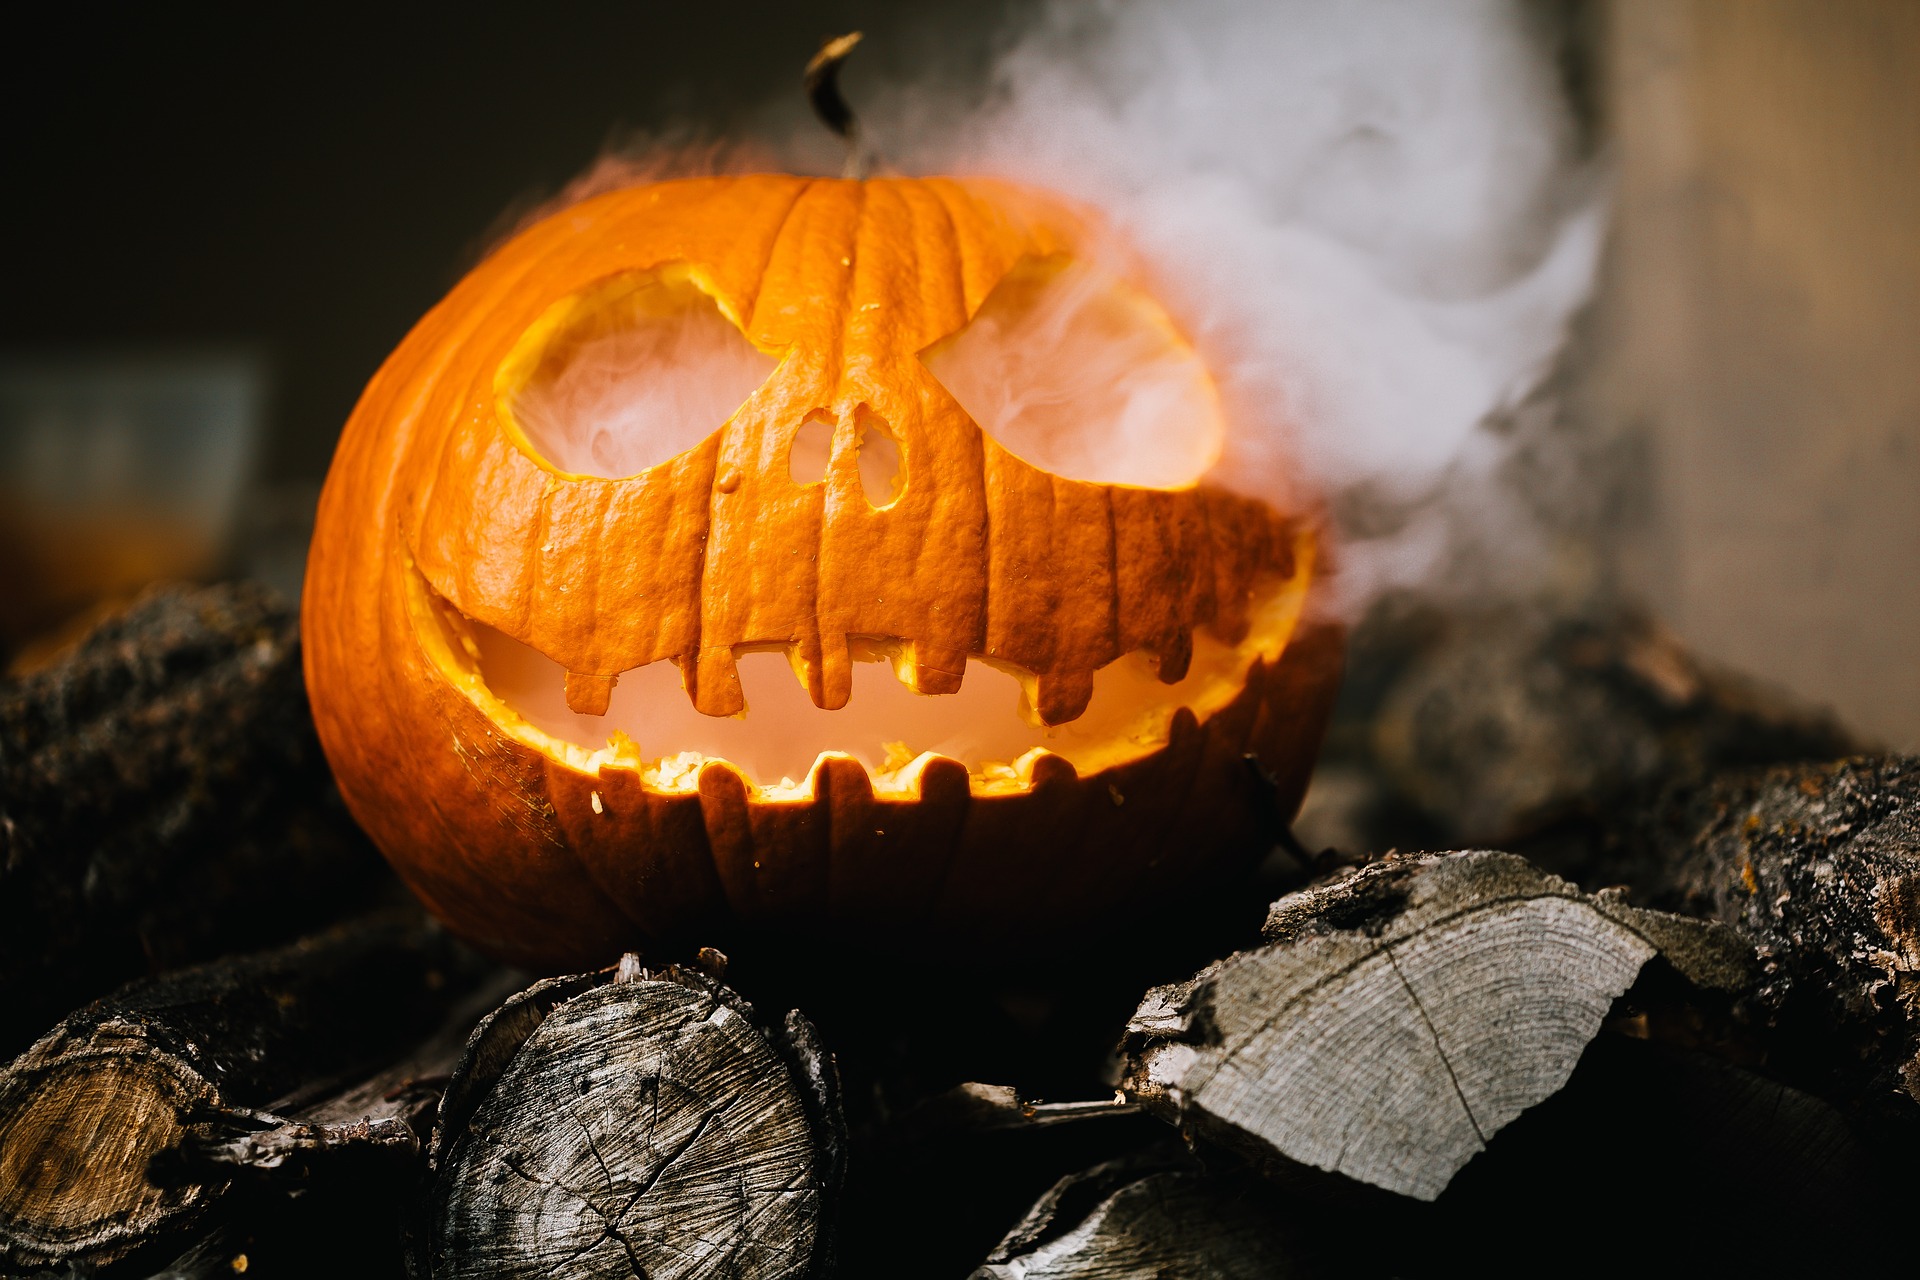 Spooky Offerings and Festivities Kick Off for Halloween